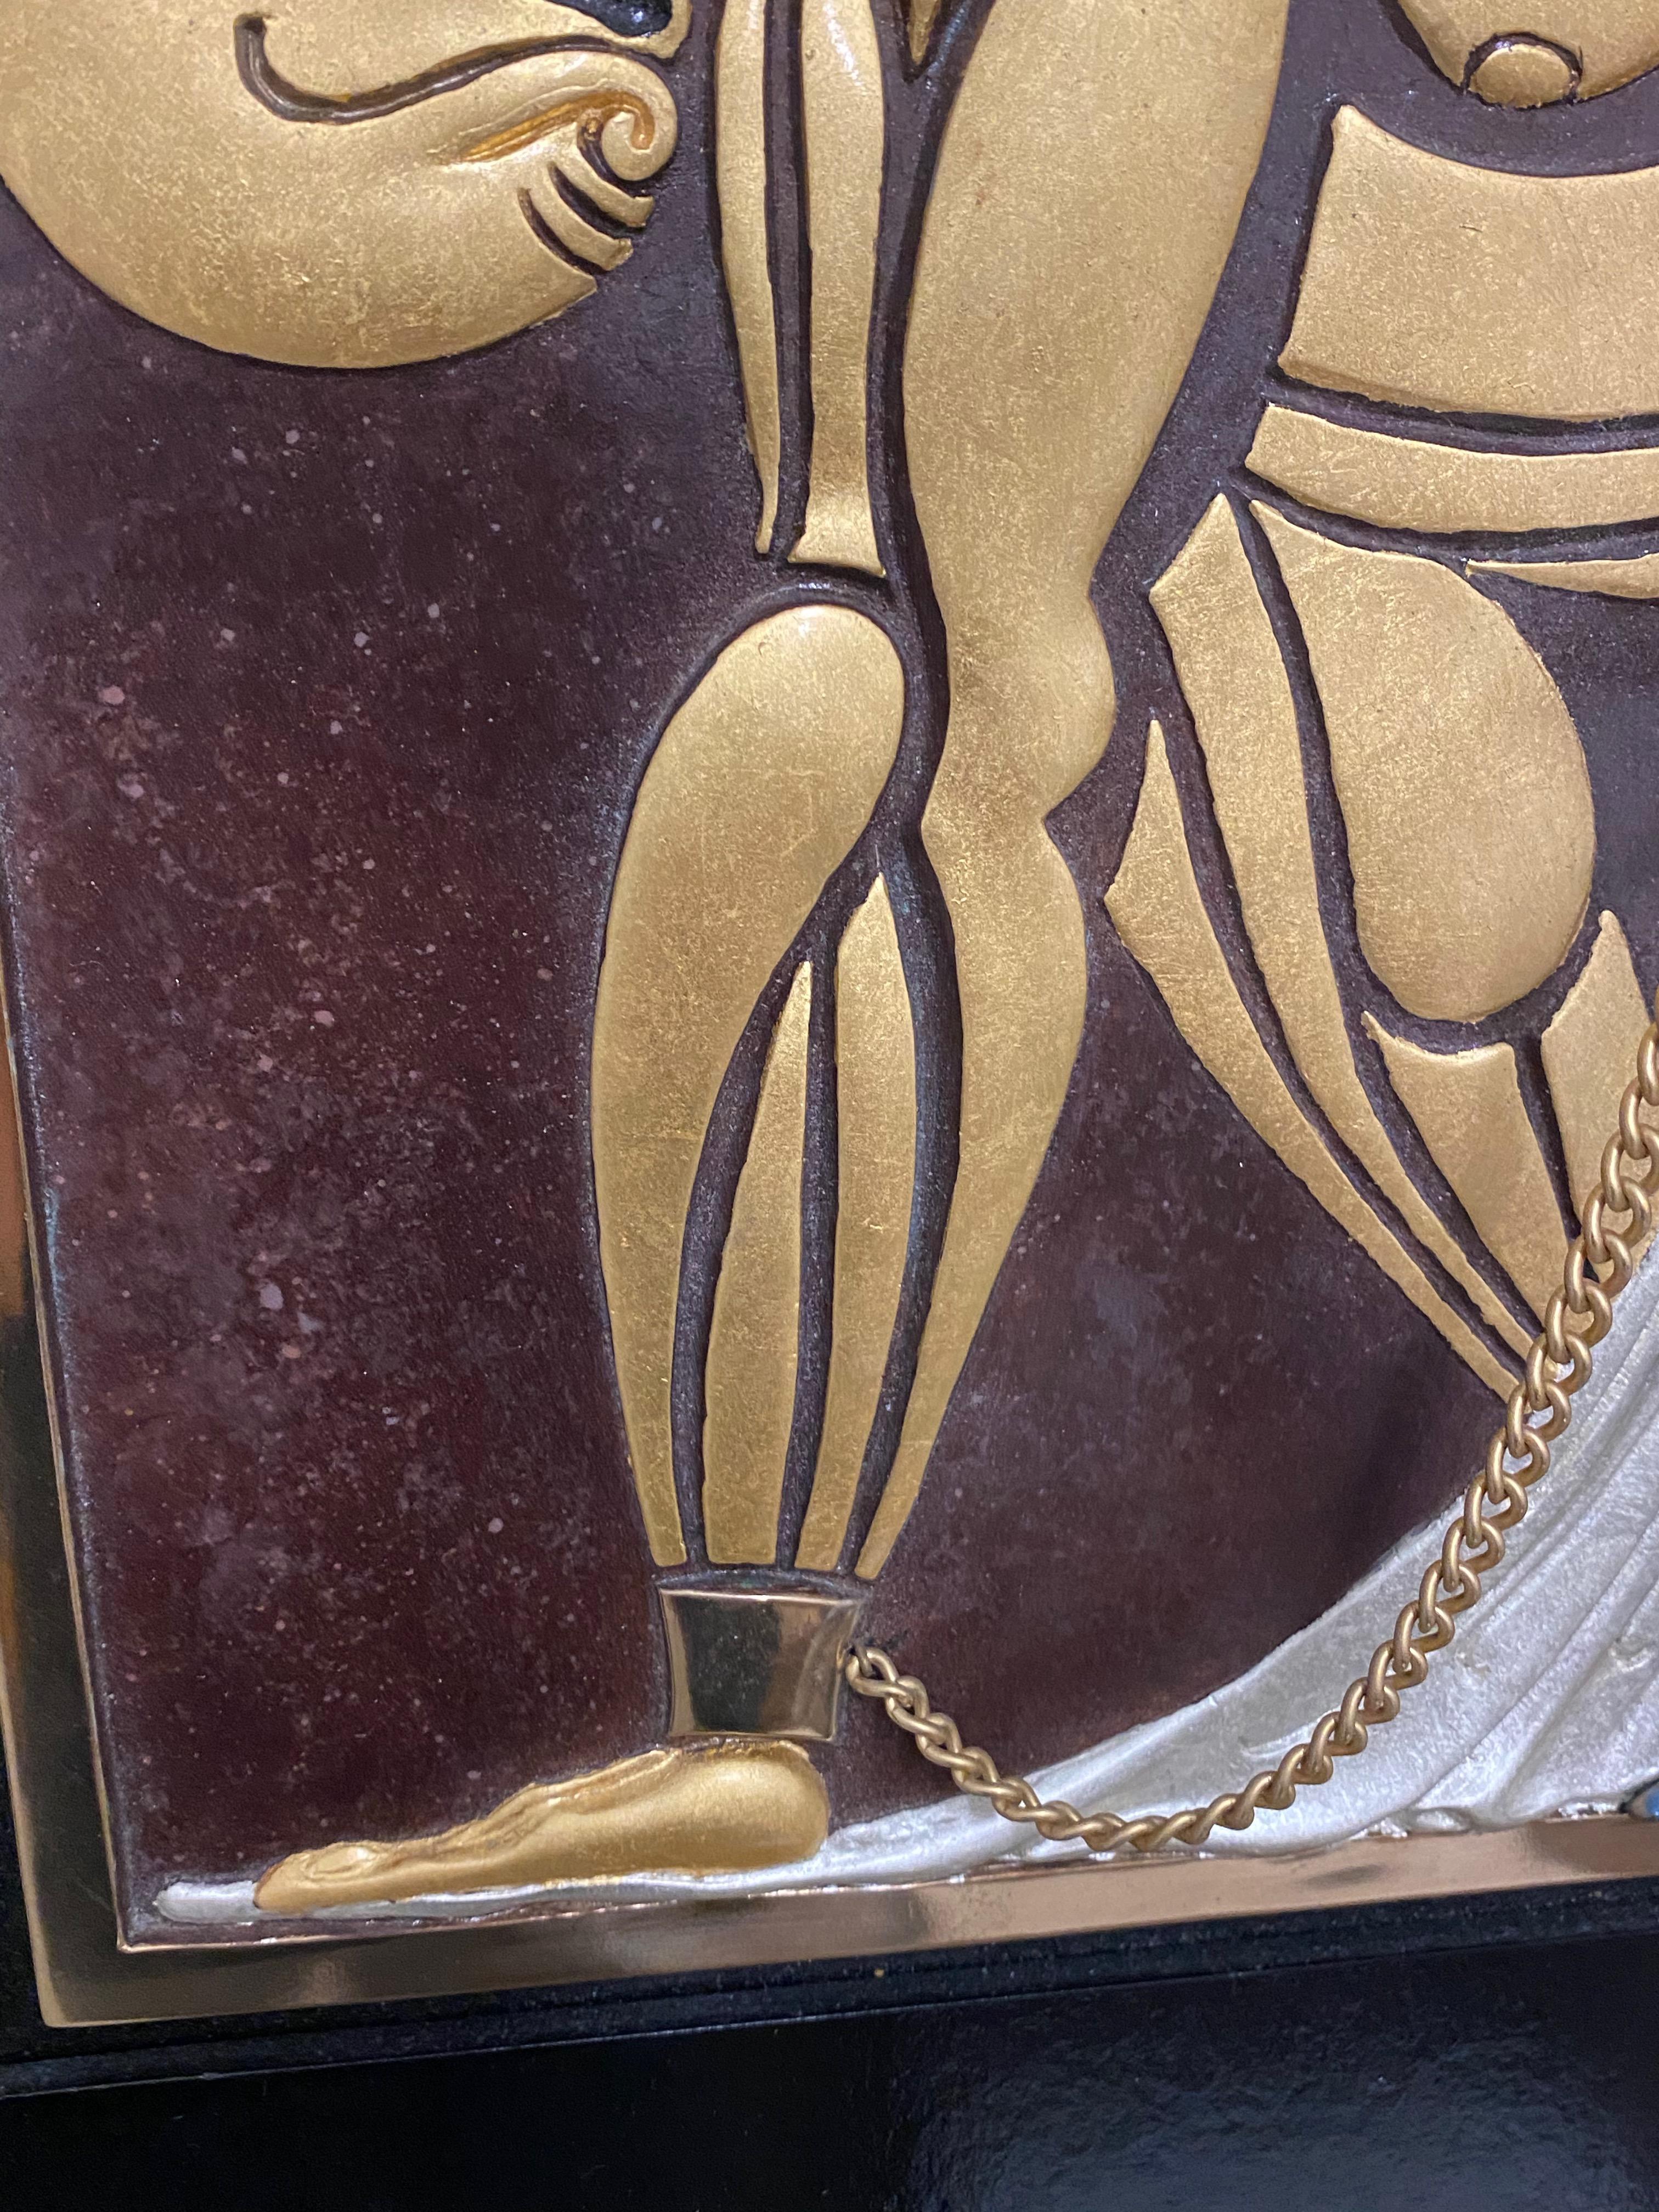 Late 20th Century Signed Erte Wall Sculpture of Samson and Delilah Romain Tirtoff Art For Sale